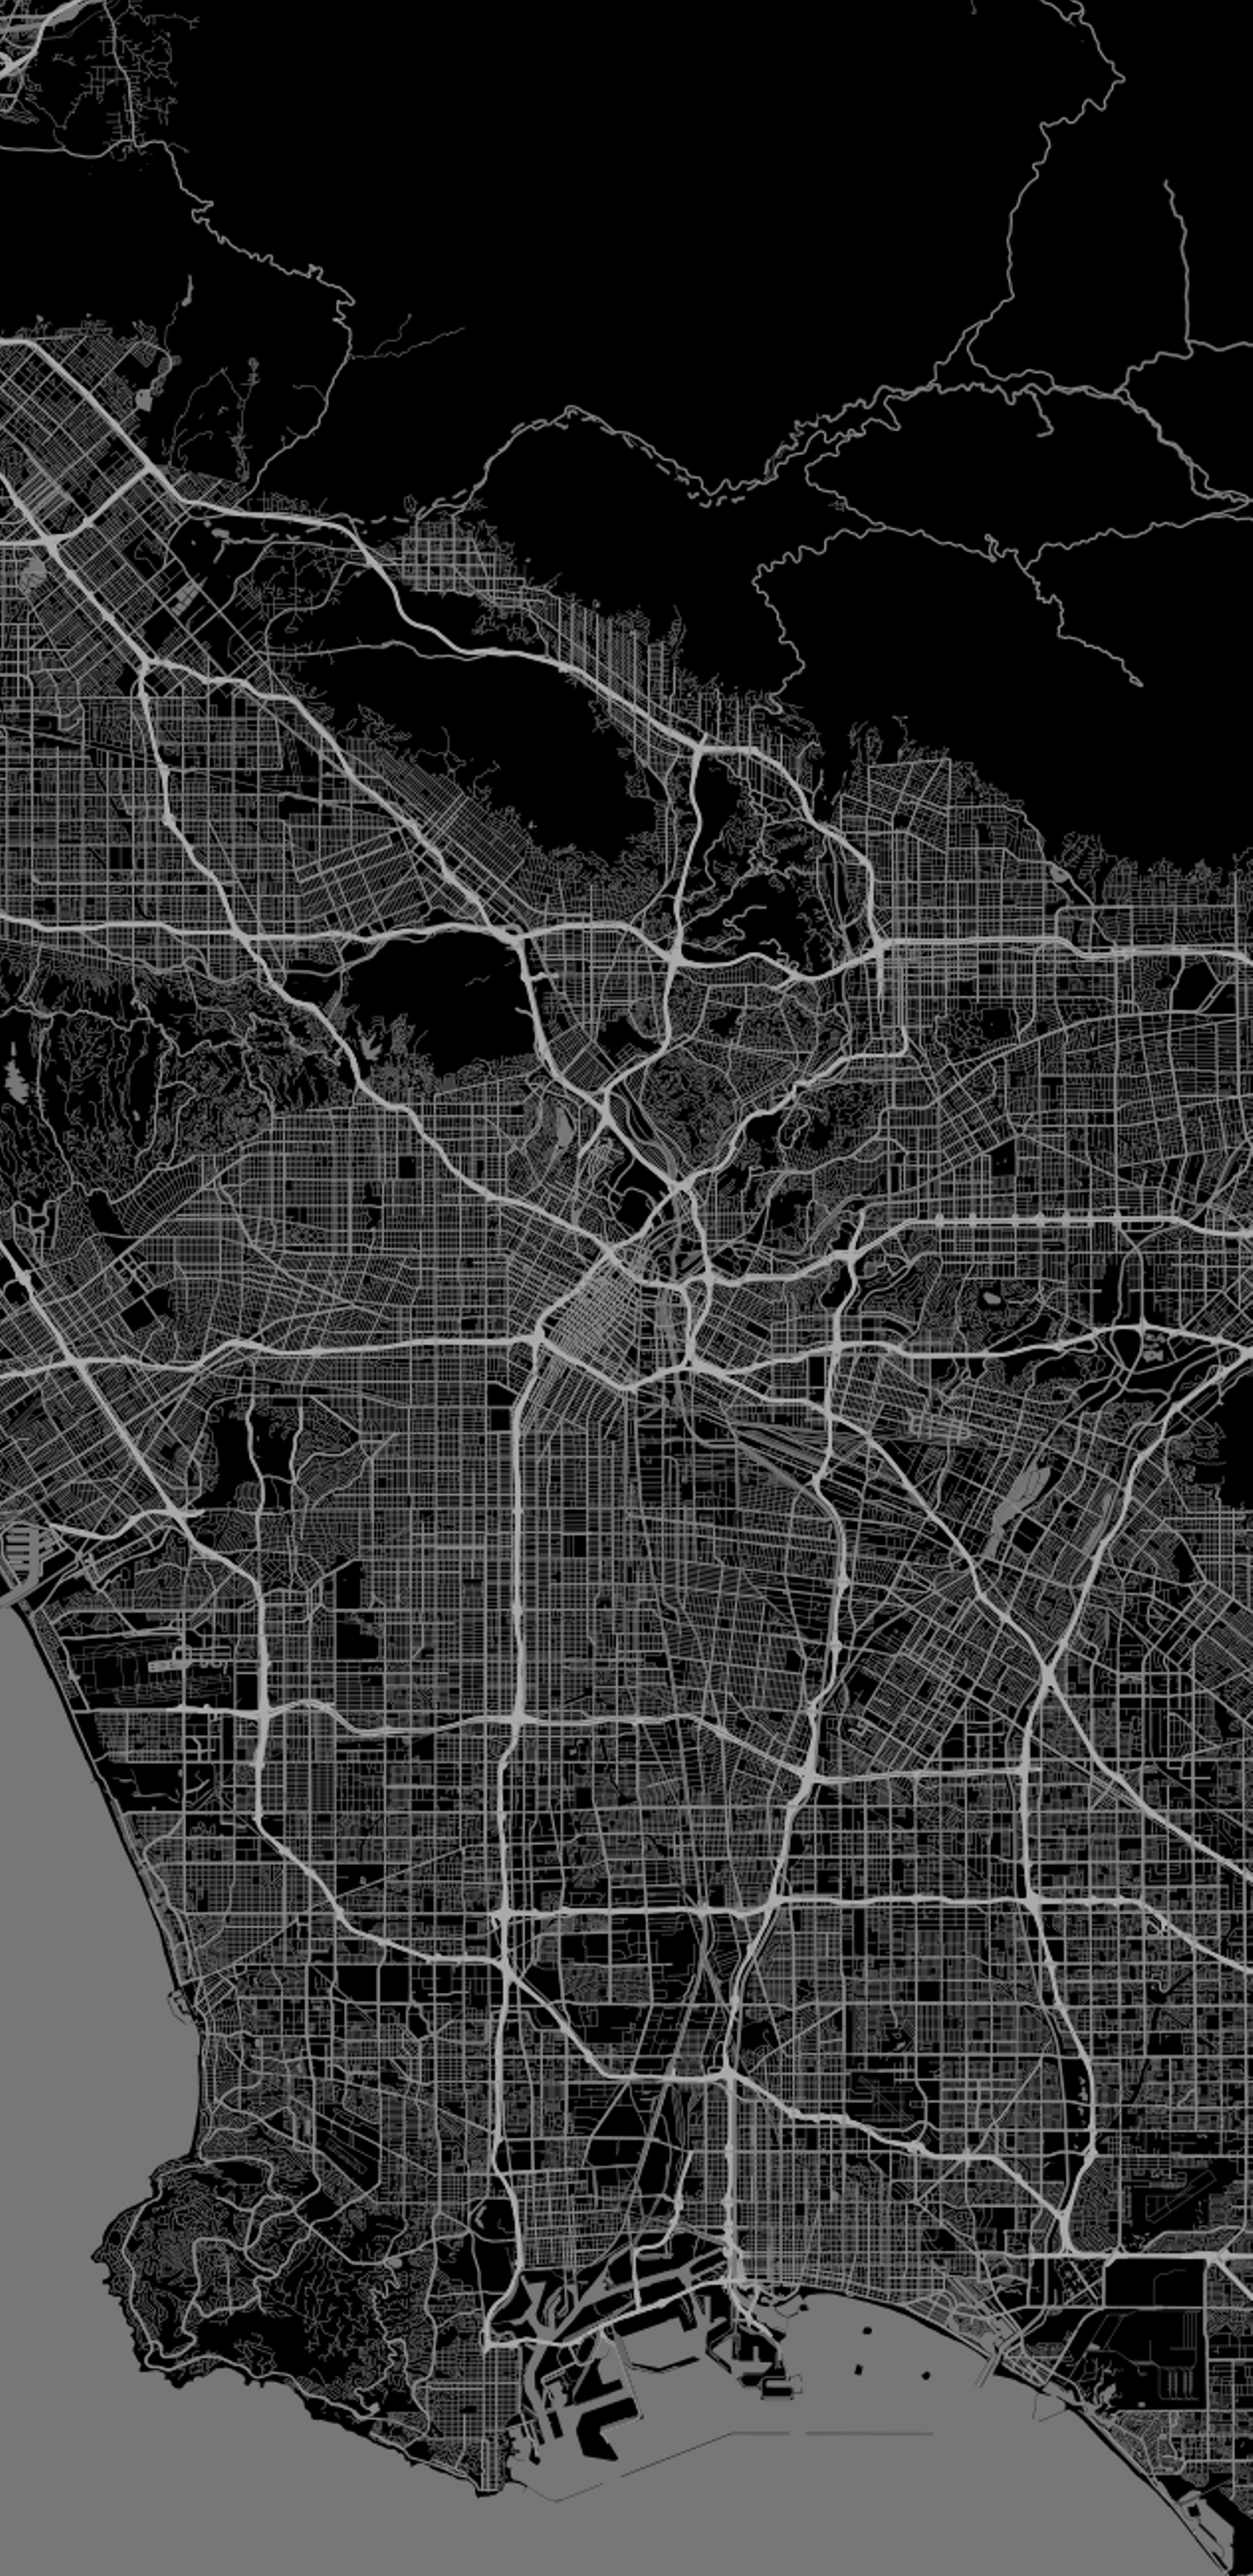 Los Angeles map cell phone wallpaper. Los Angeles in 2019